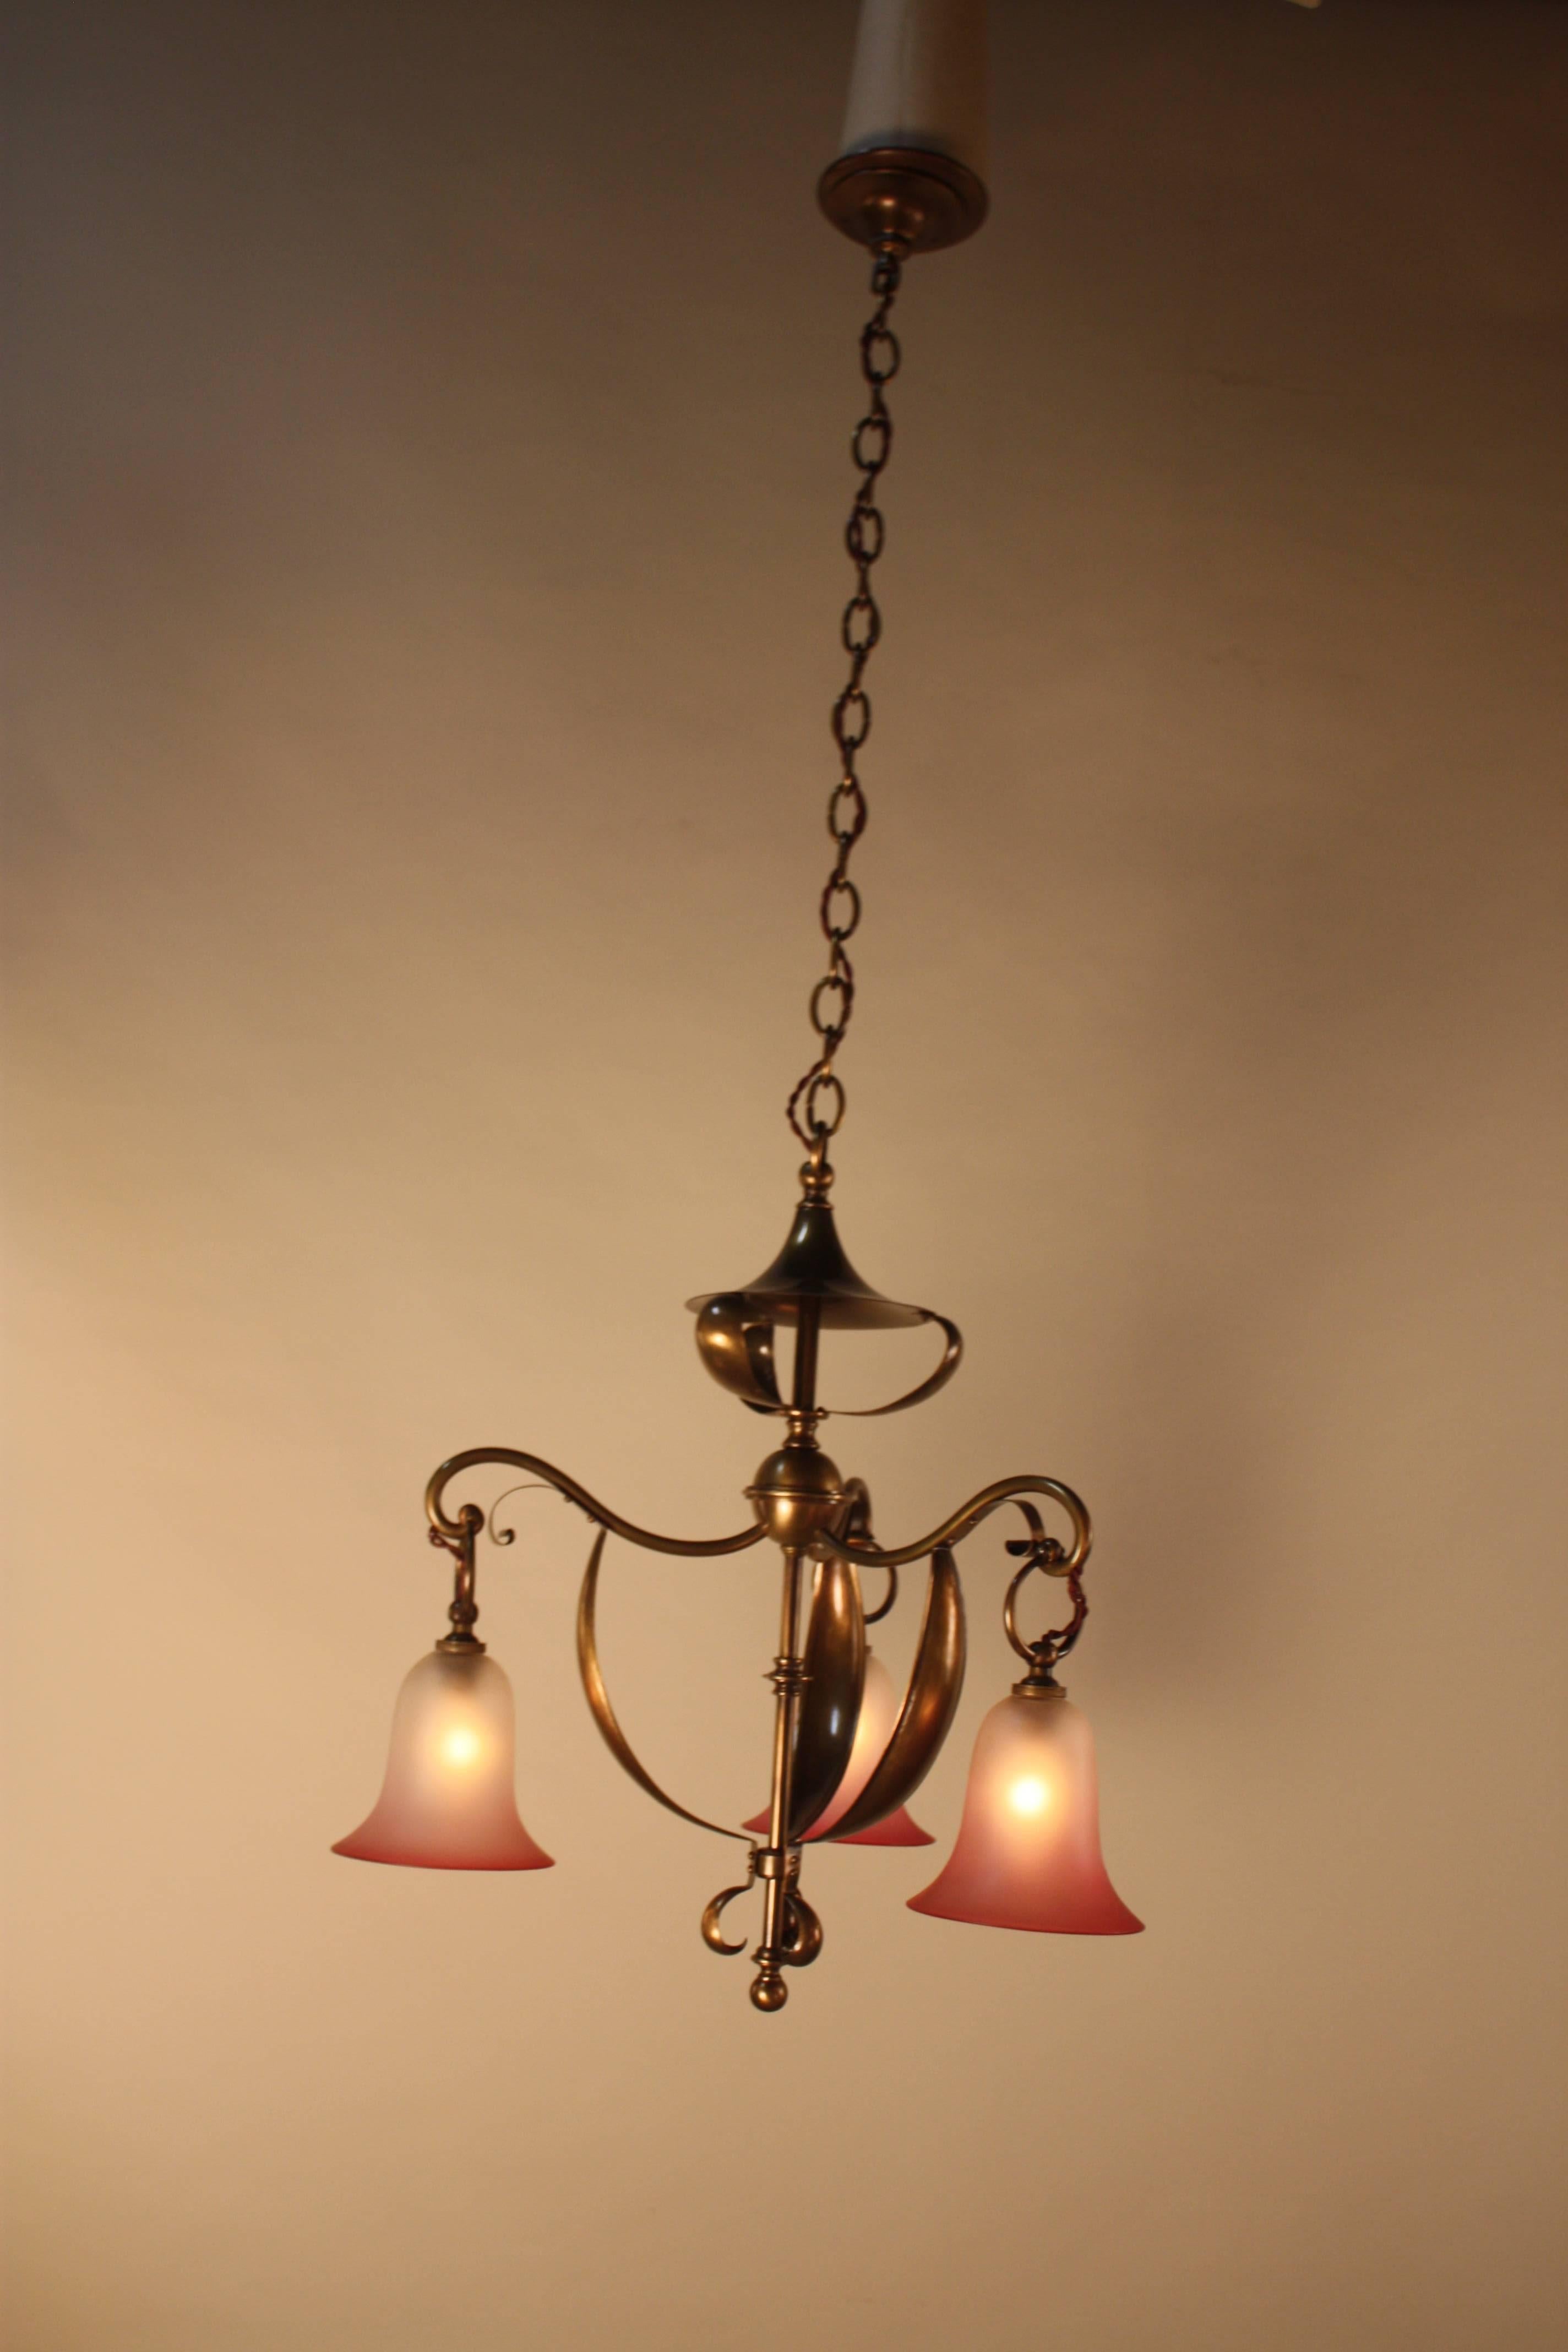 A fabulous English three-light semi oxidized brass Art Nouveau chandelier with beautiful glass shades.
The minimum height fully installed is 27